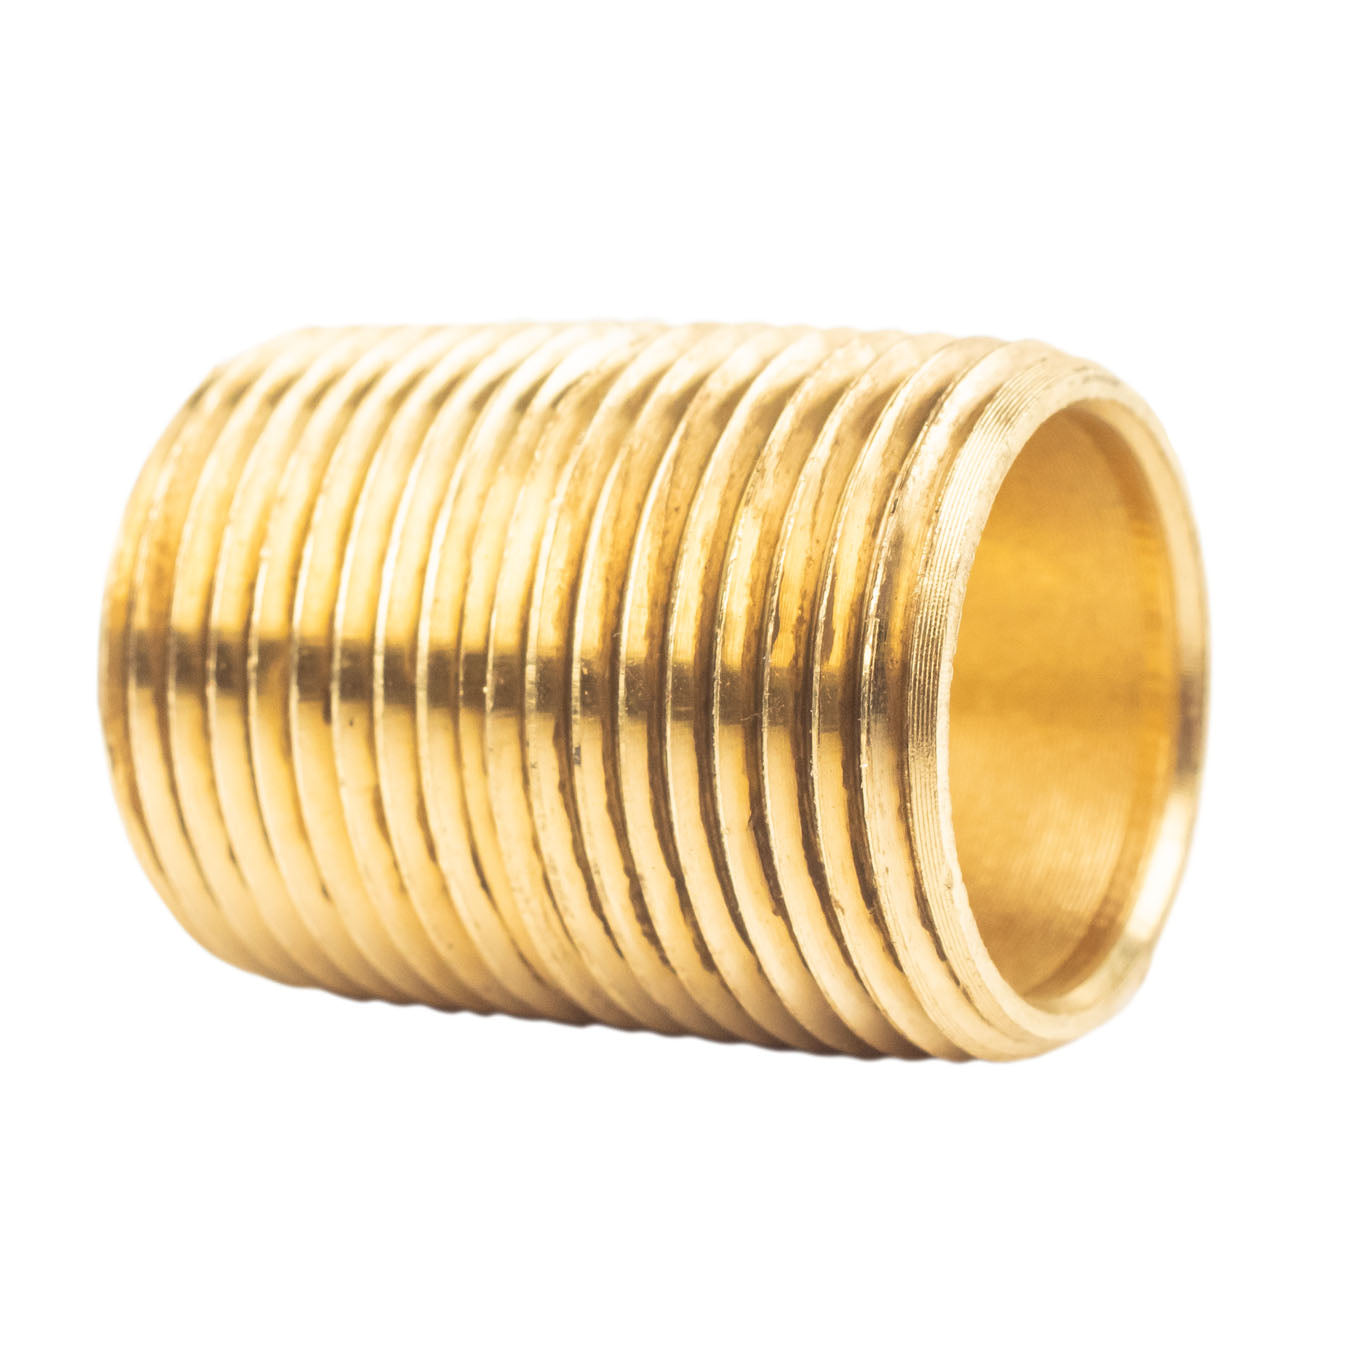 3/4" NPT X Male Close Pipe Nipple Threaded Brass Fitting Pipe Connector Single